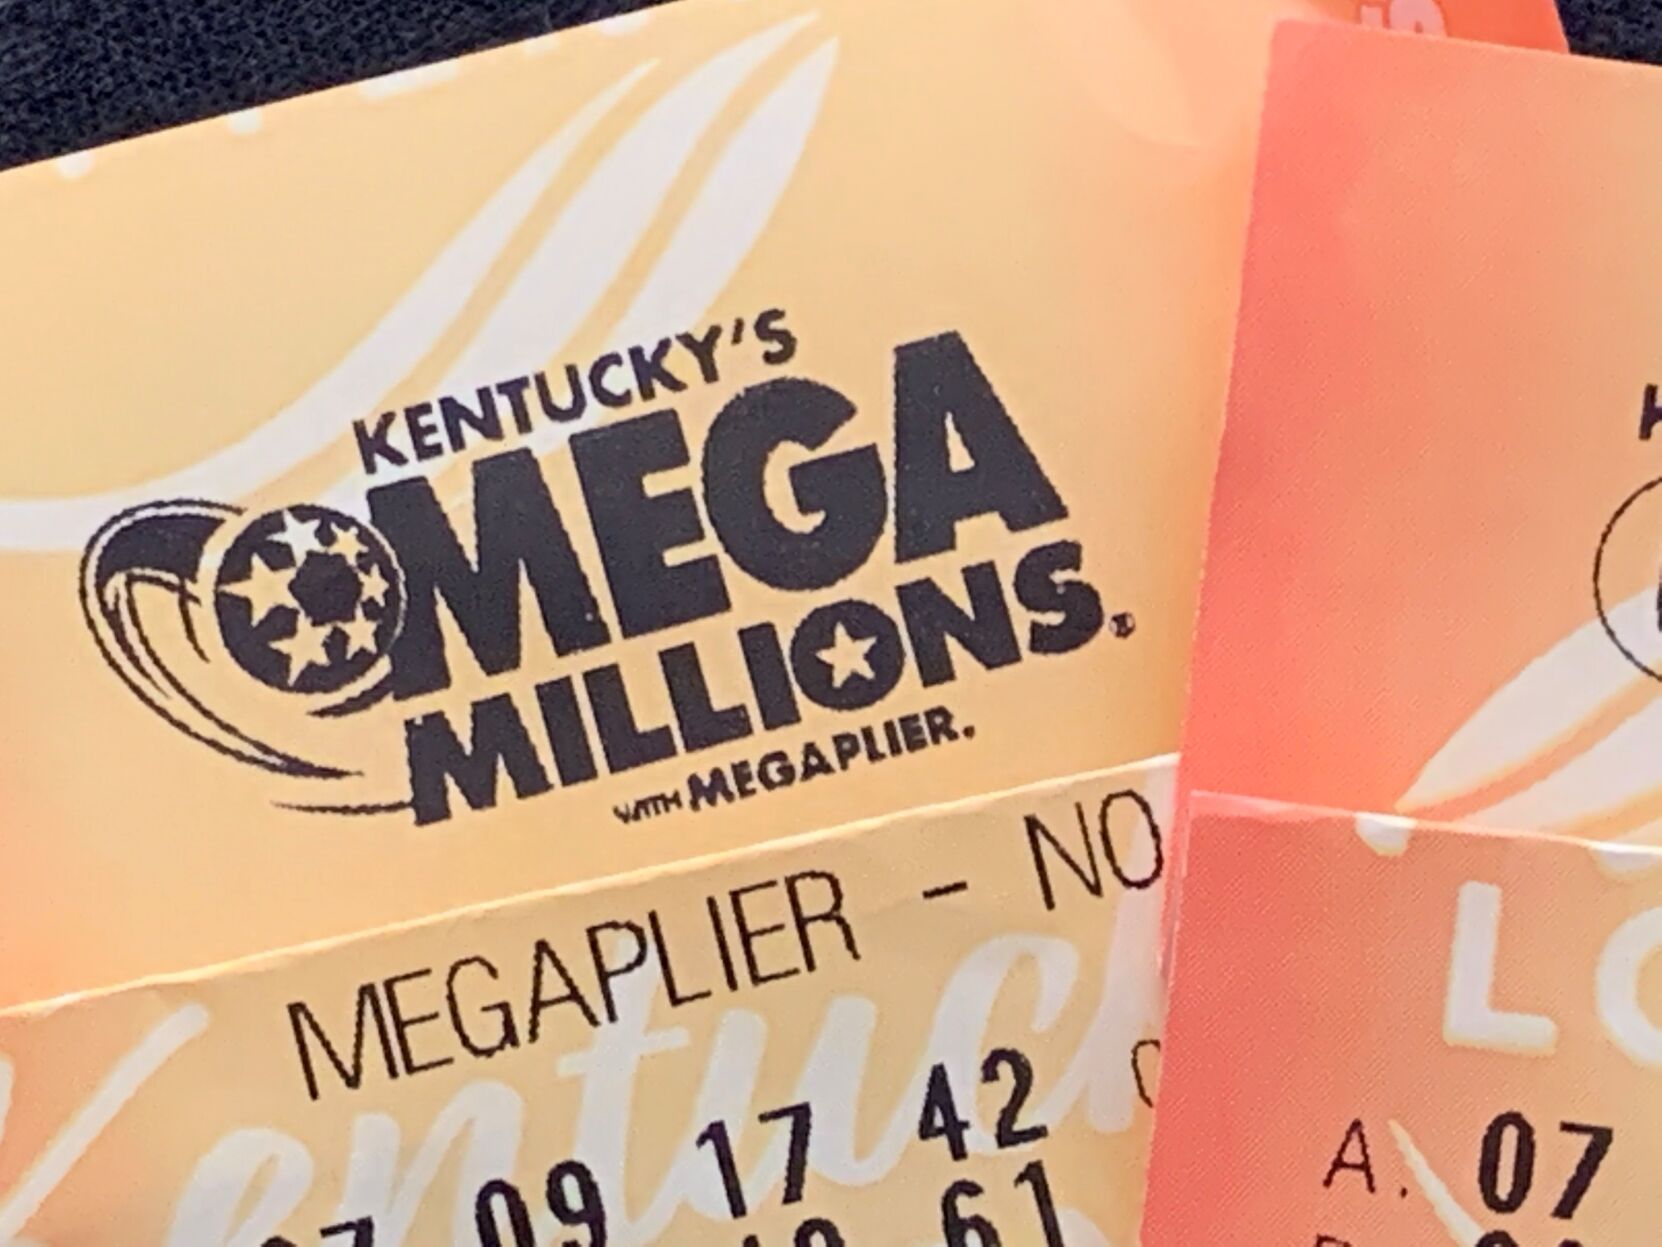 ky mega millions numbers today